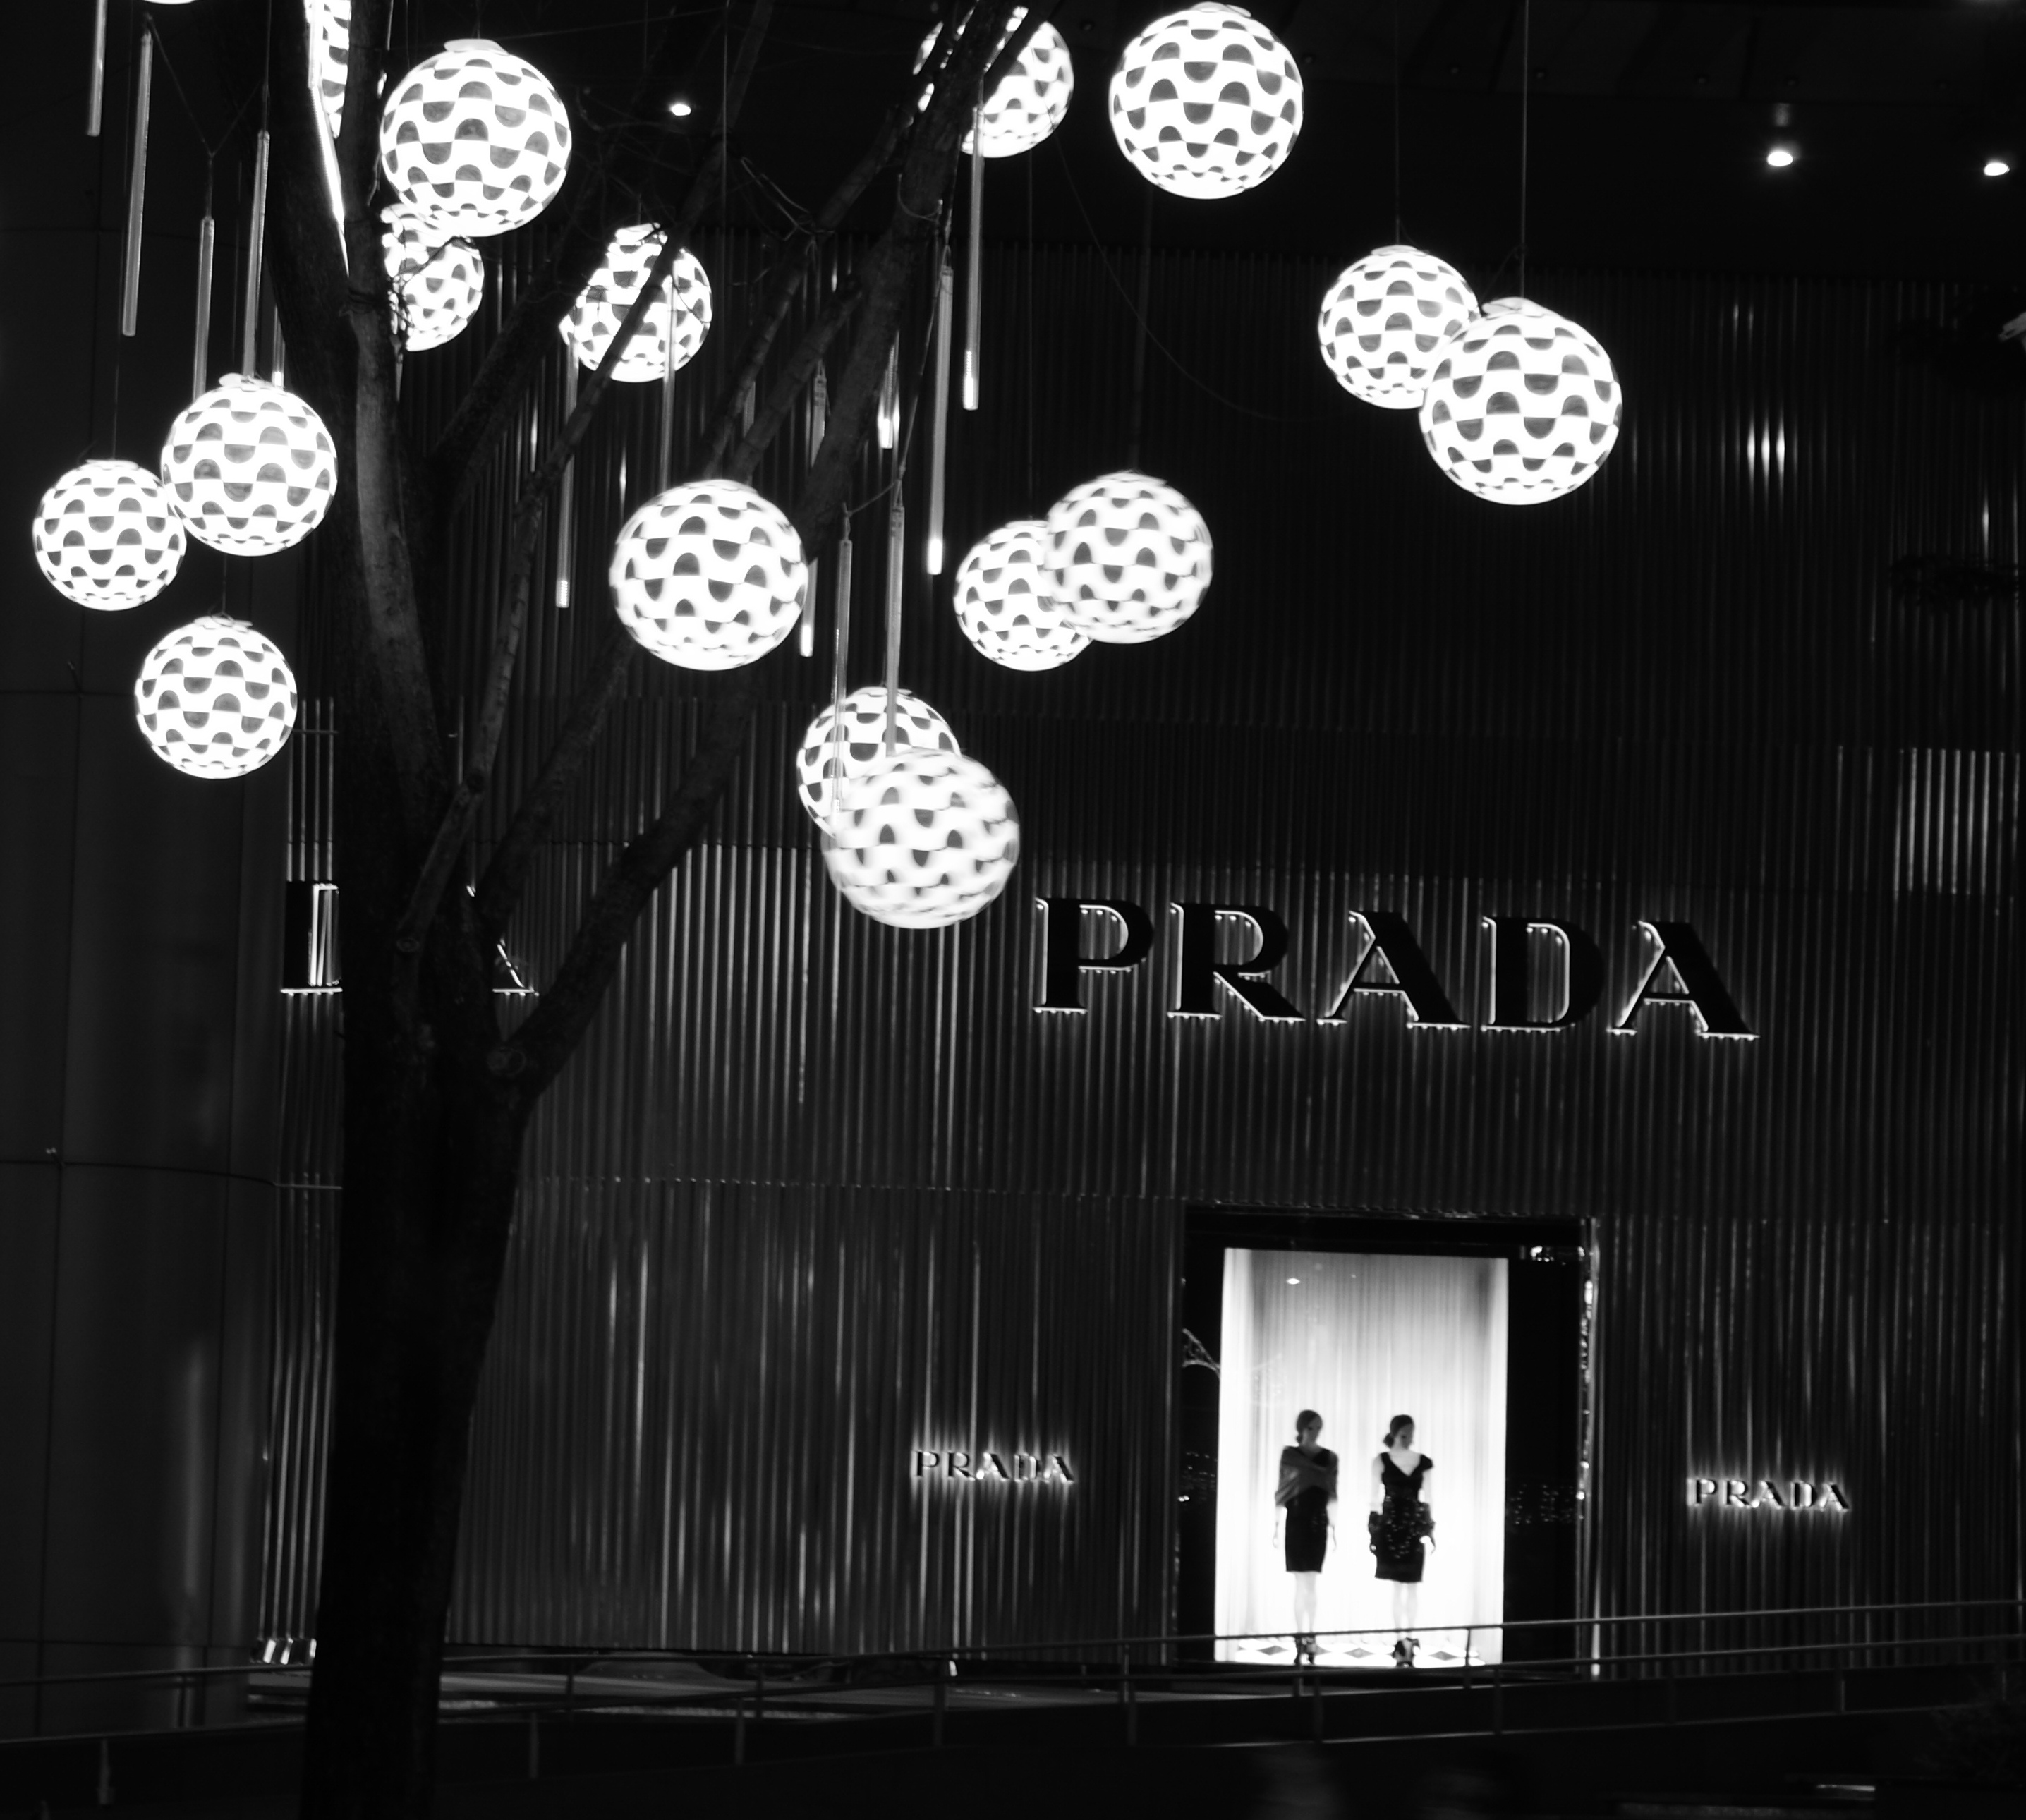 REUTERS NEXT-Prada sees second-hand fashion as opportunity, weighs partnerships